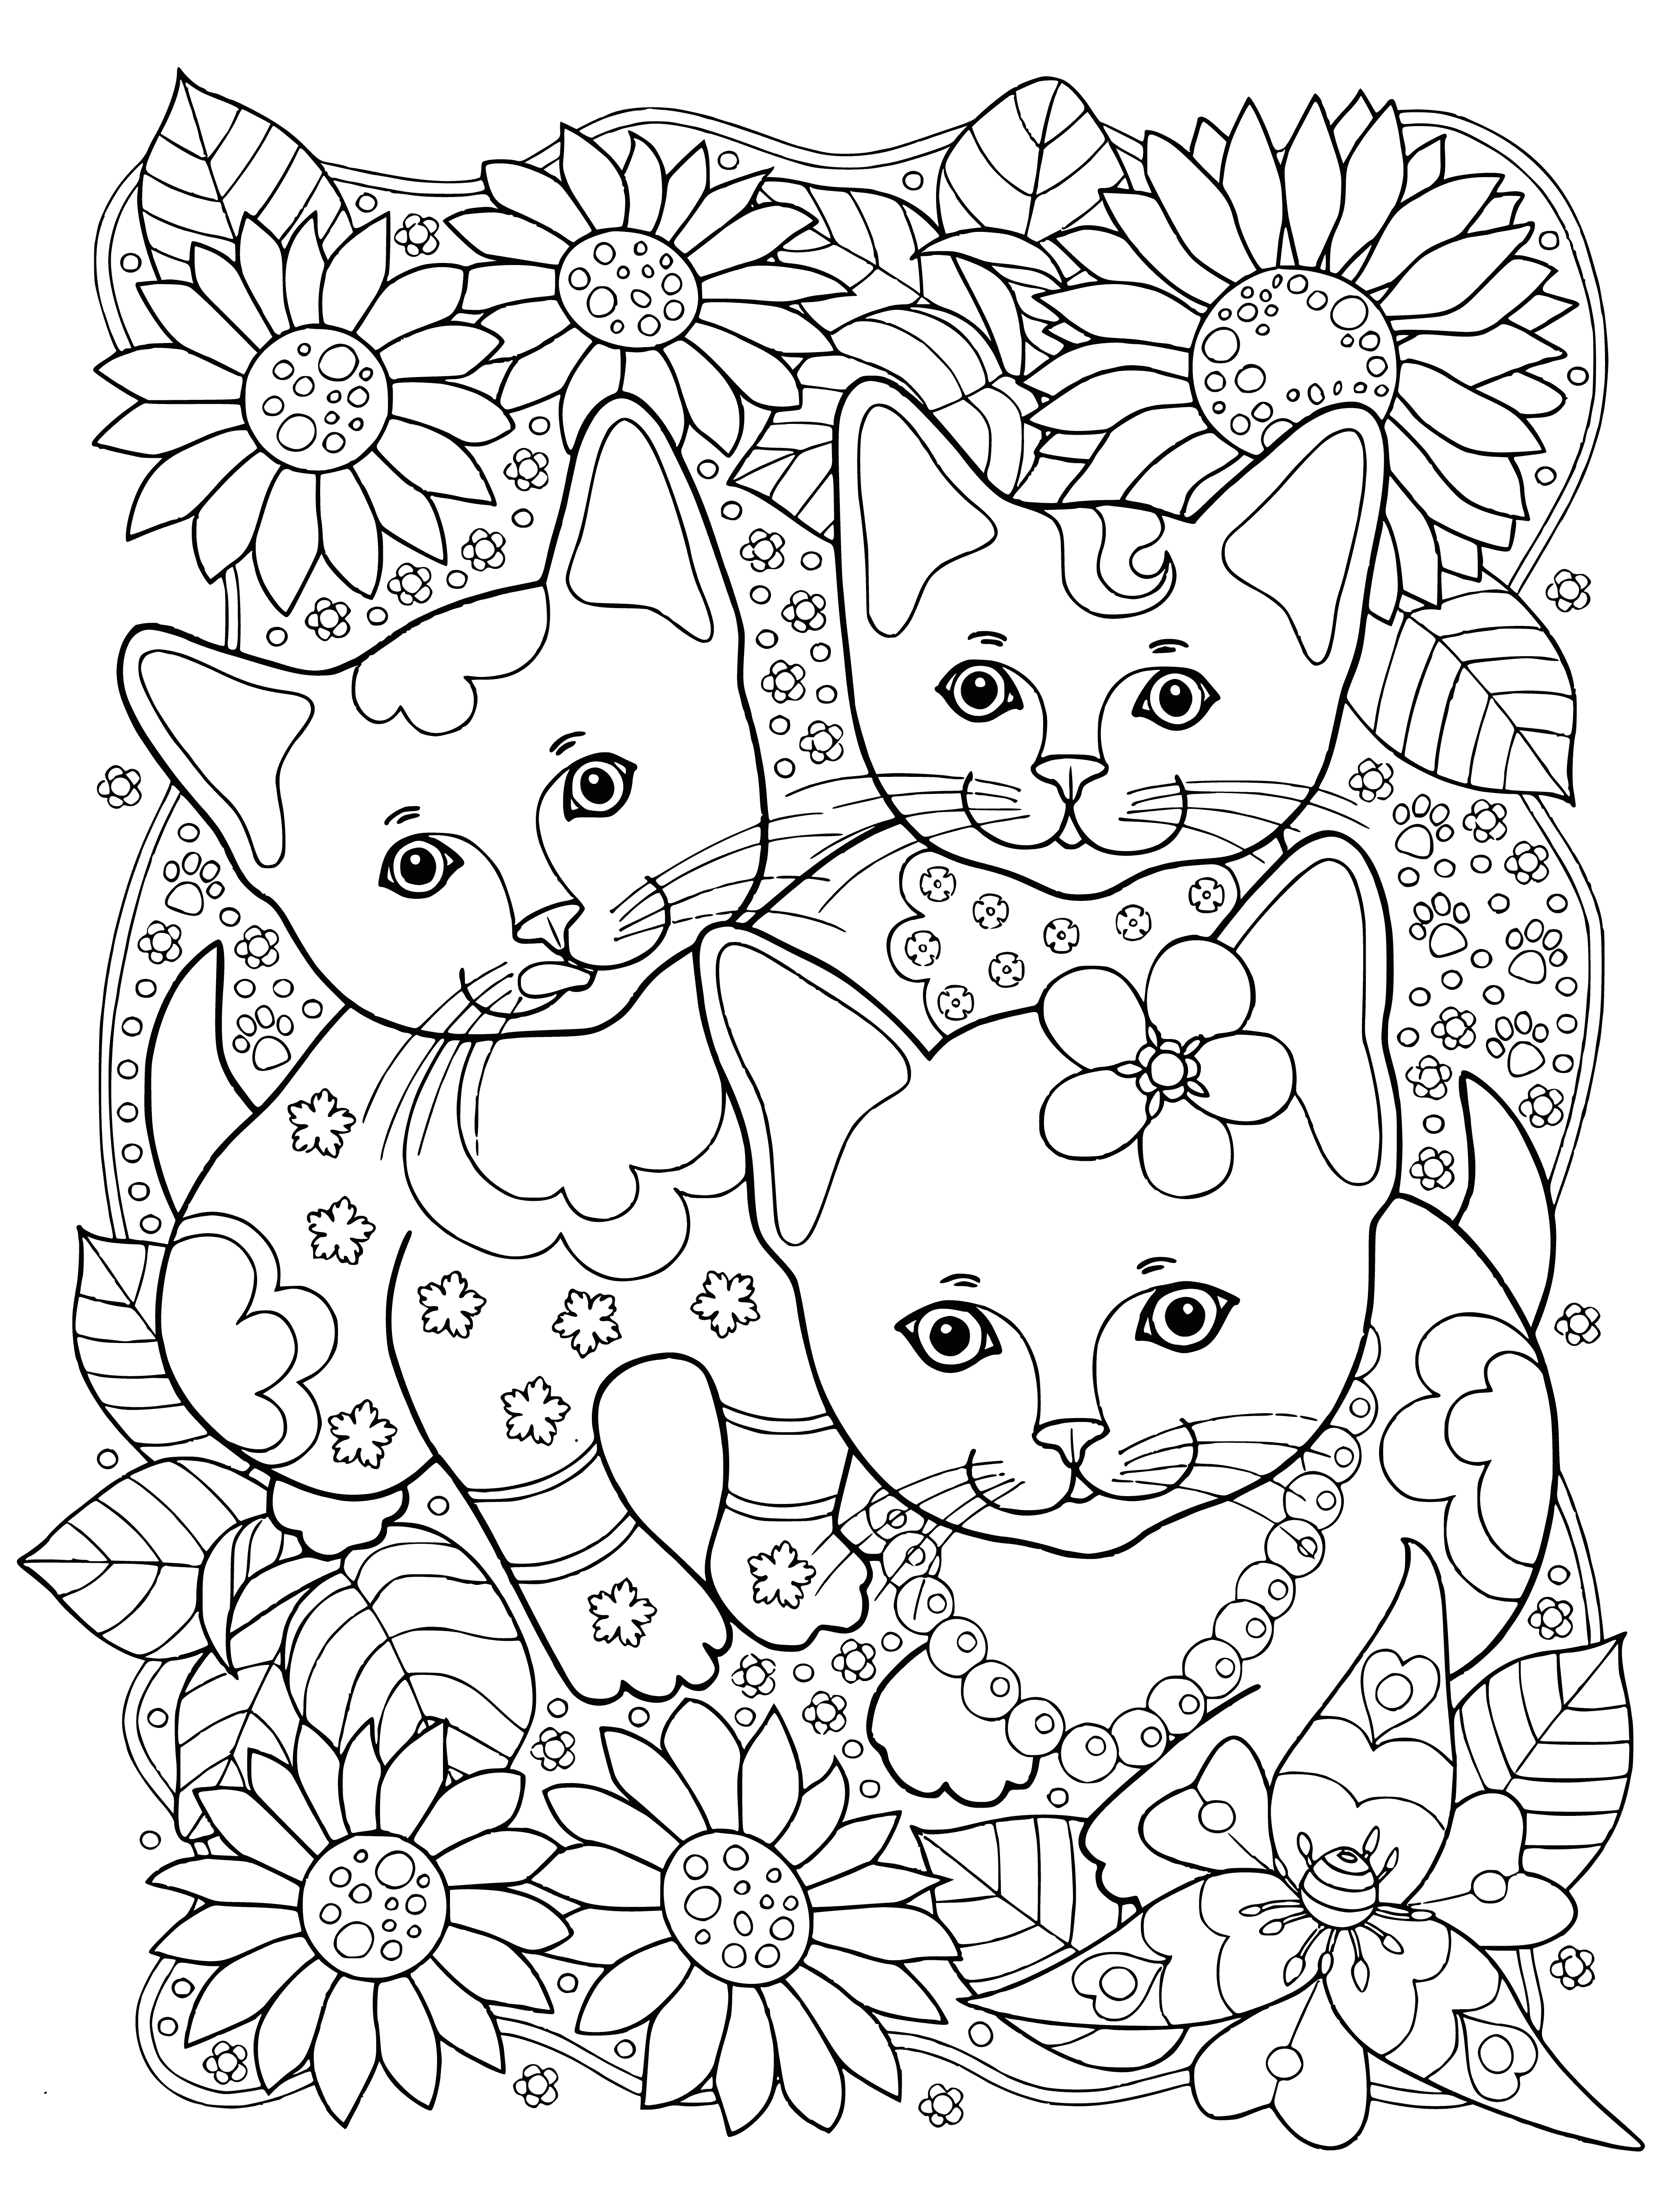 coloring page: Three kittens enjoying the beauty of nature in a garden surrounded by flowers, trees, and grass.